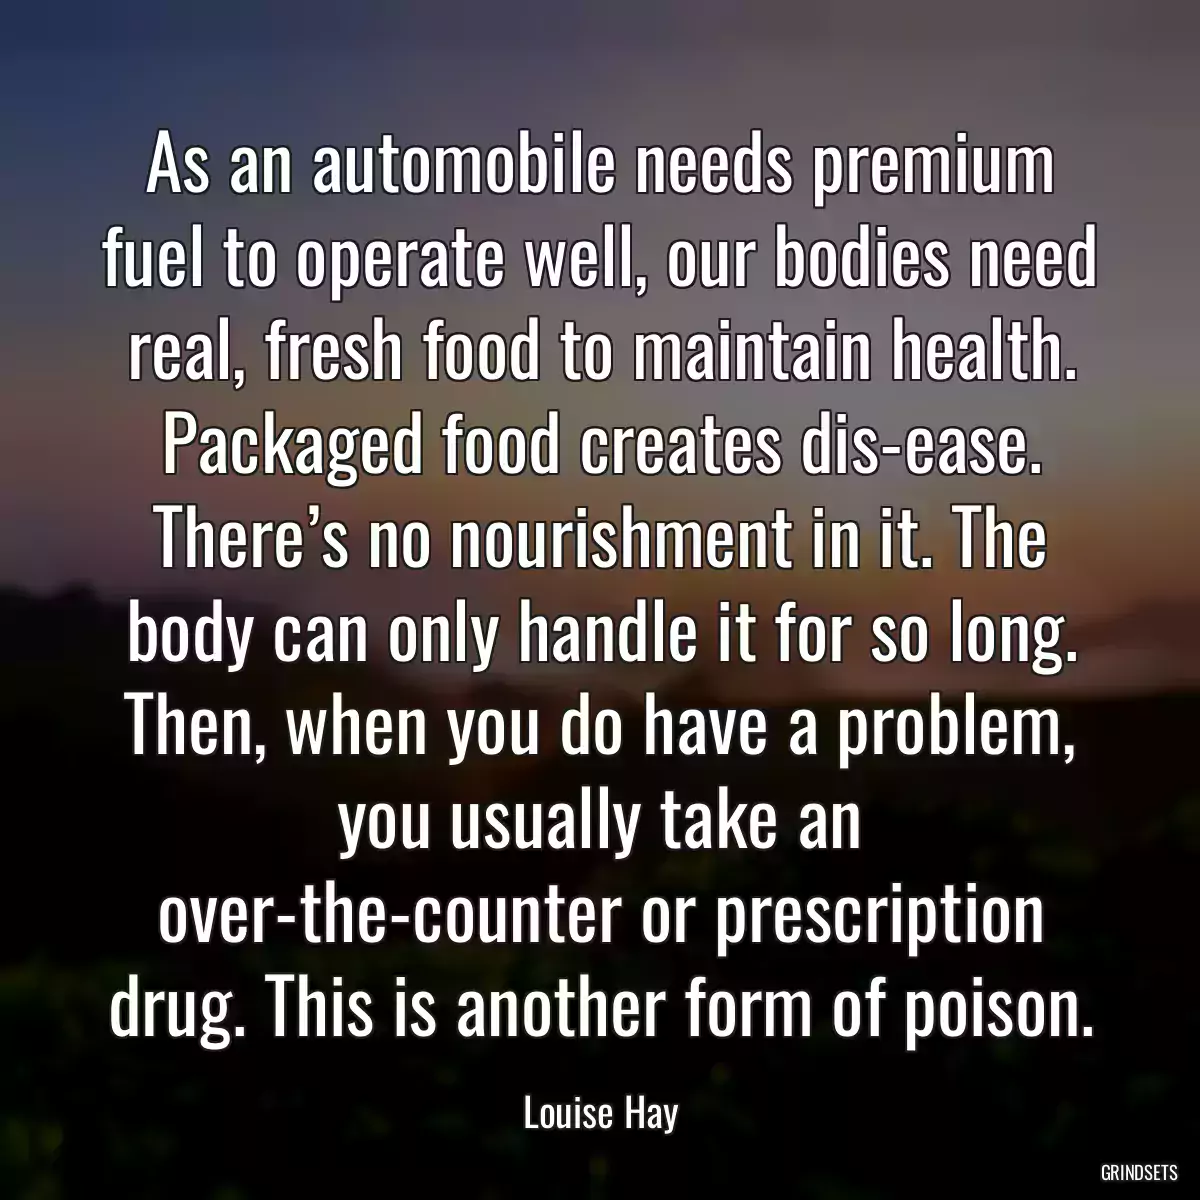 As an automobile needs premium fuel to operate well, our bodies need real, fresh food to maintain health. Packaged food creates dis-ease. There’s no nourishment in it. The body can only handle it for so long. Then, when you do have a problem, you usually take an over-the-counter or prescription drug. This is another form of poison.